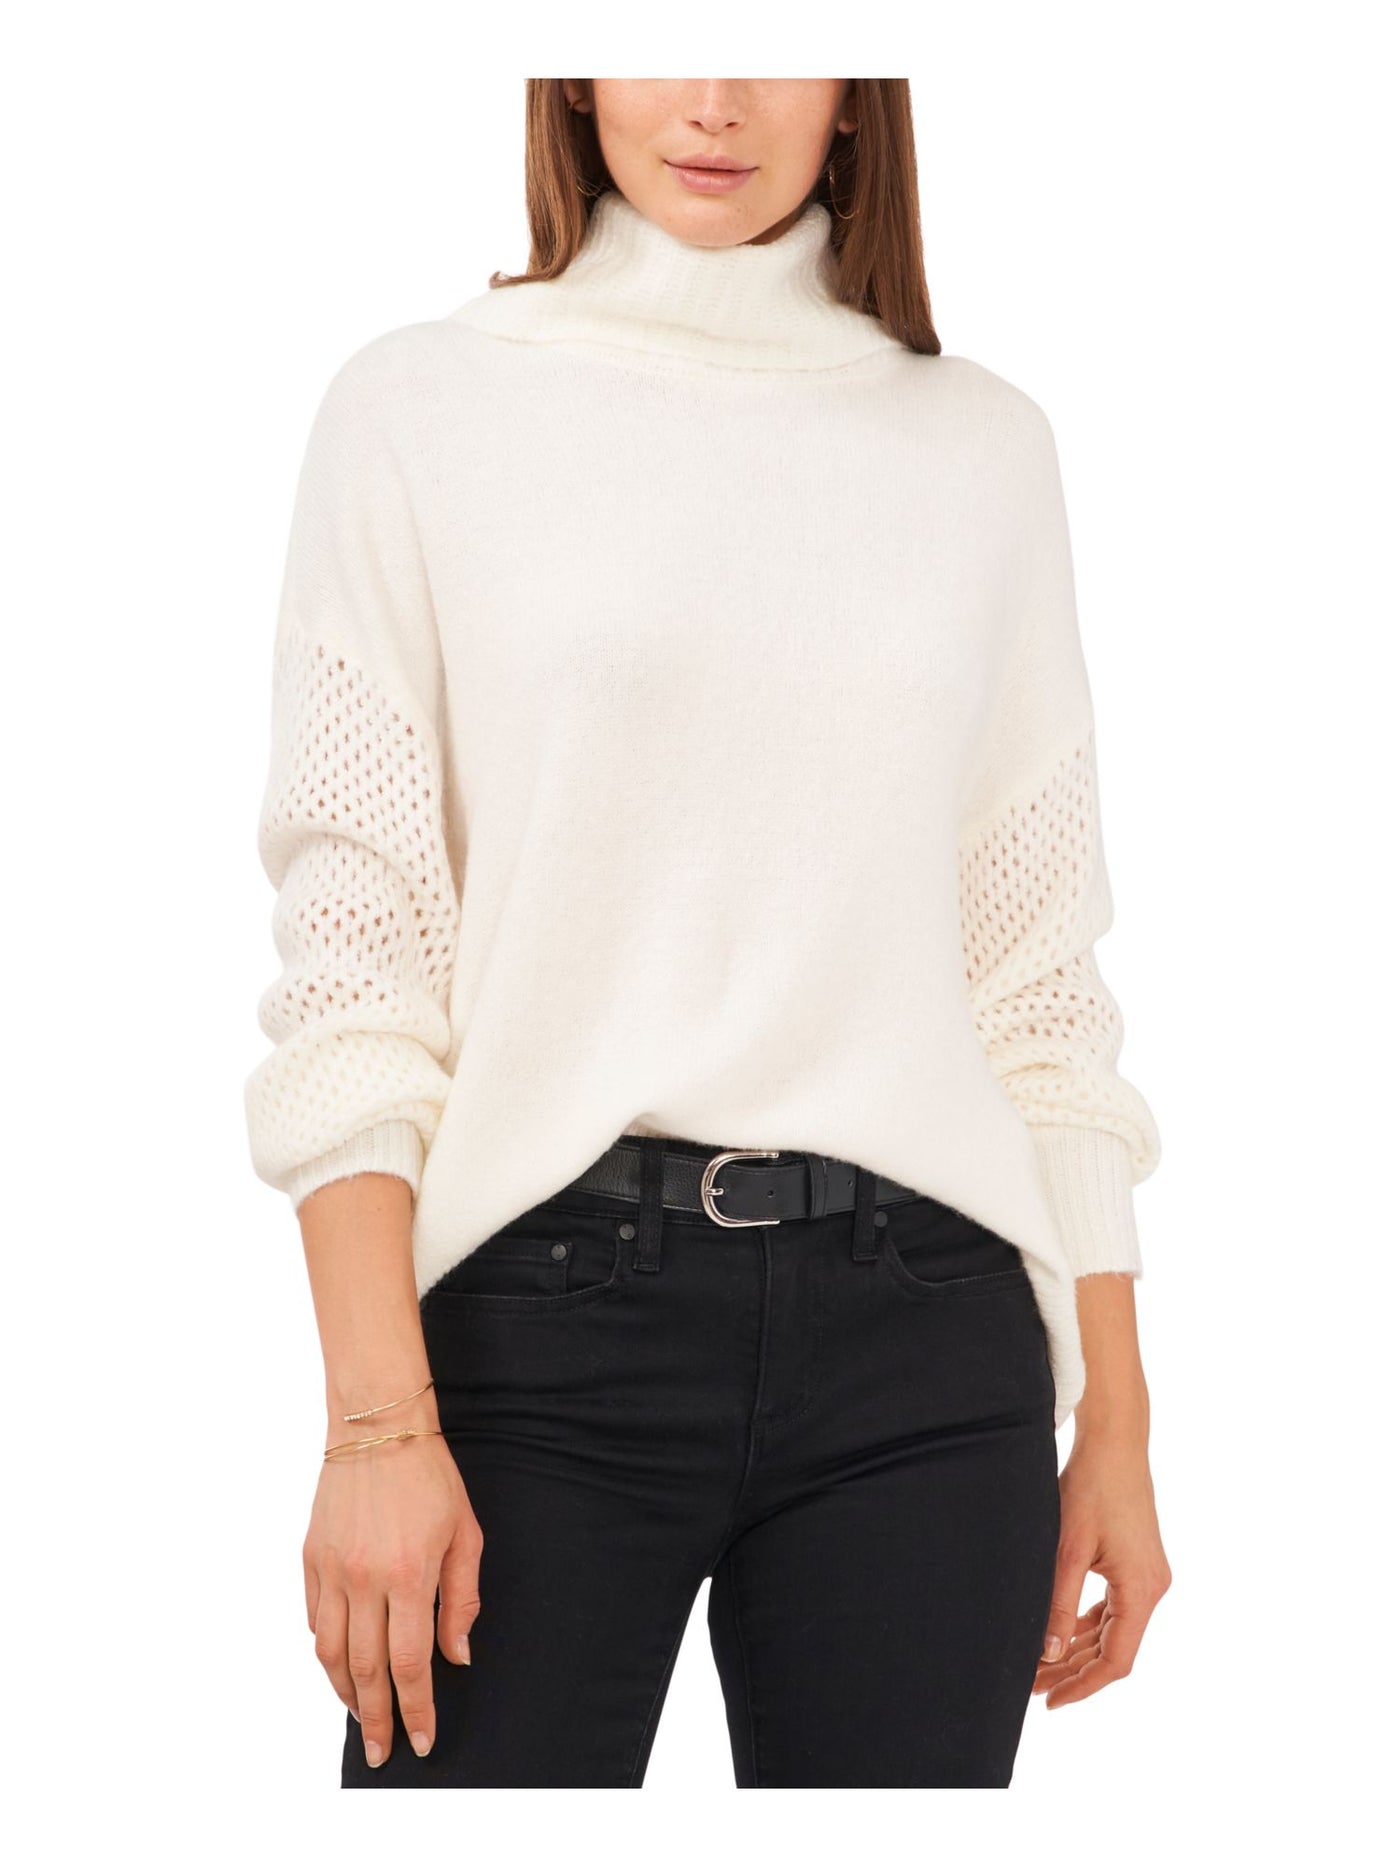 VINCE CAMUTO Womens Ivory Turtle Neck Wear To Work Sweater XL